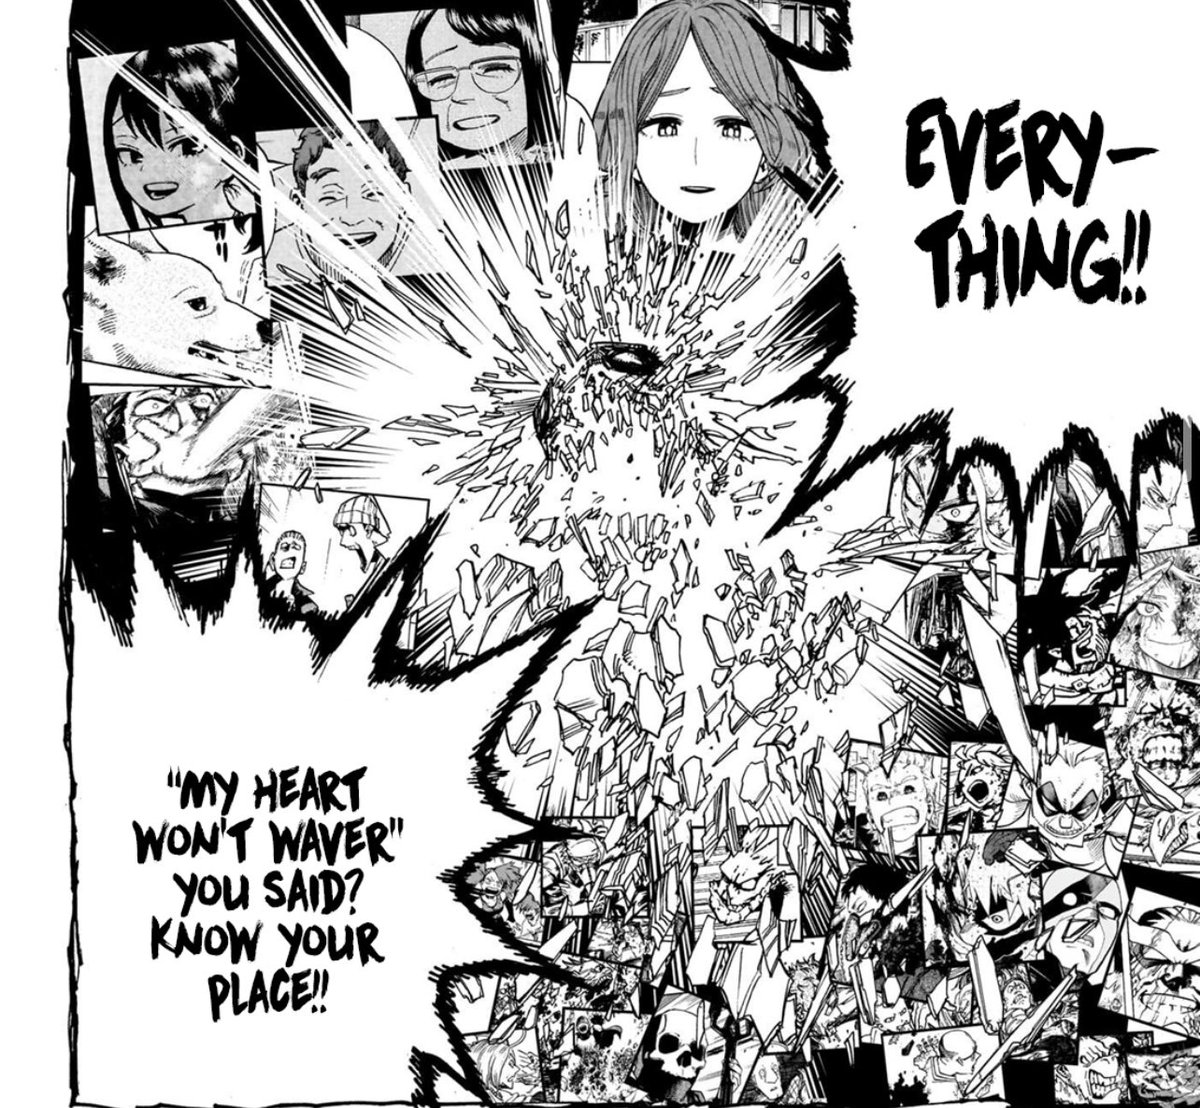 What was destroyed here was Tomura Shigaraki. Shigaraki name was never really Tomura it’s almost like the “Deku” to Izuku midorya that’s his villain name. We are going to see Tenko Shimura being the key to defeating AFO and he will probably give Deku OFA back